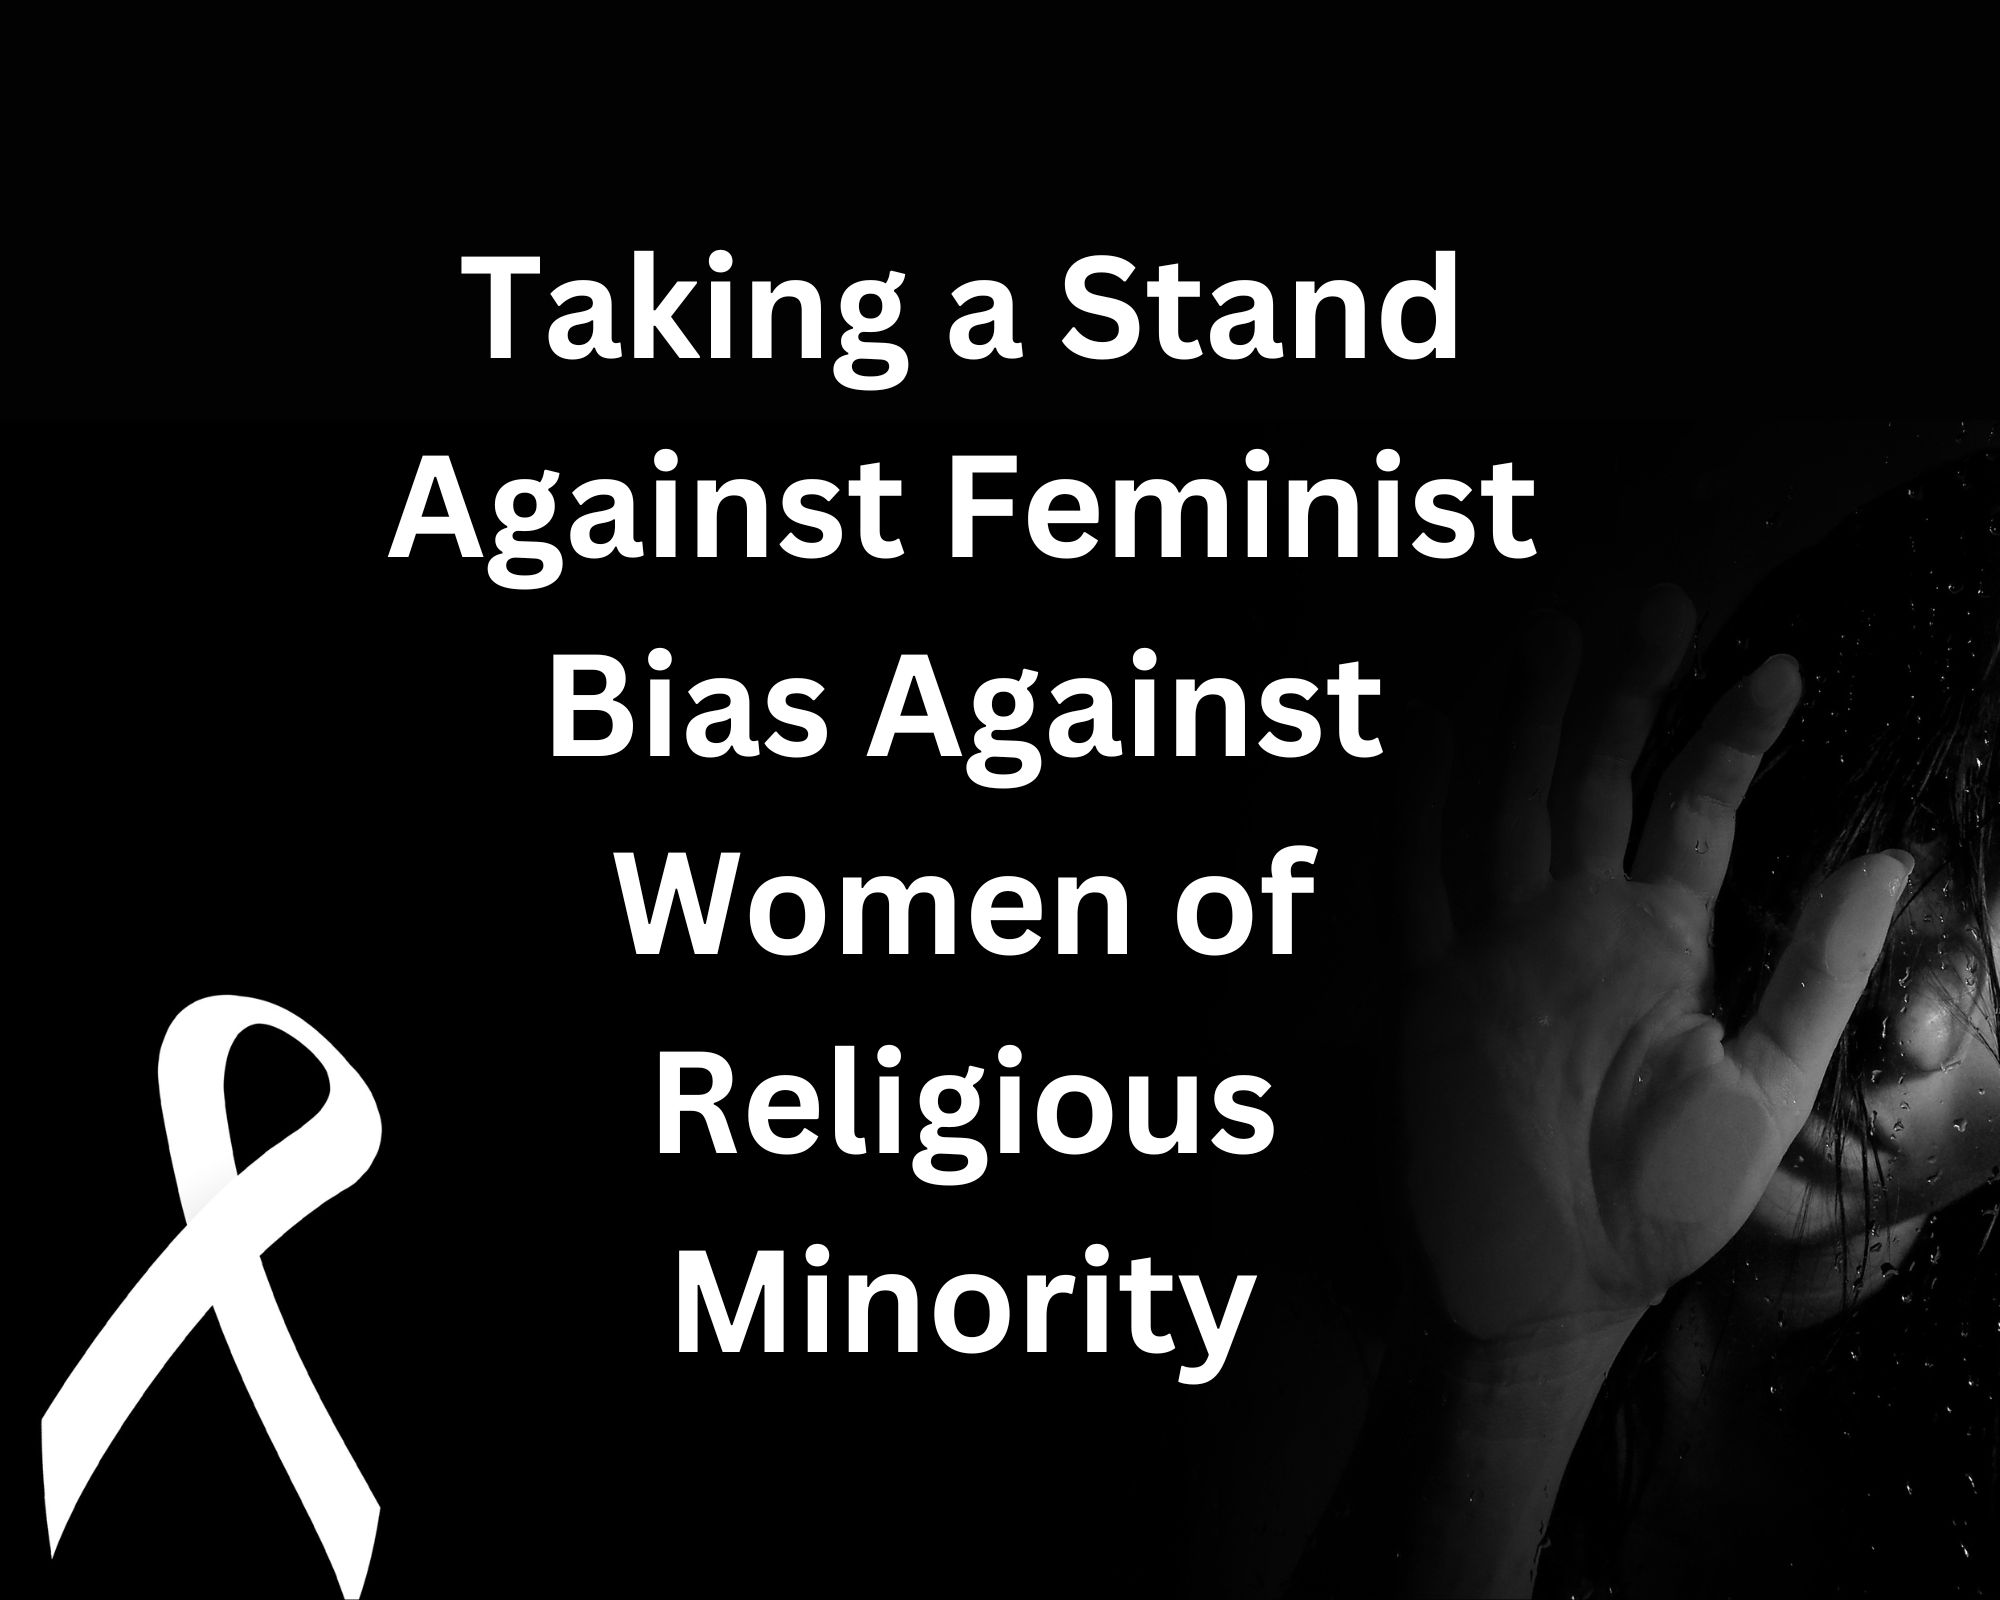 Taking a Stand Against Feminist Bias Against Women of Religious Minority